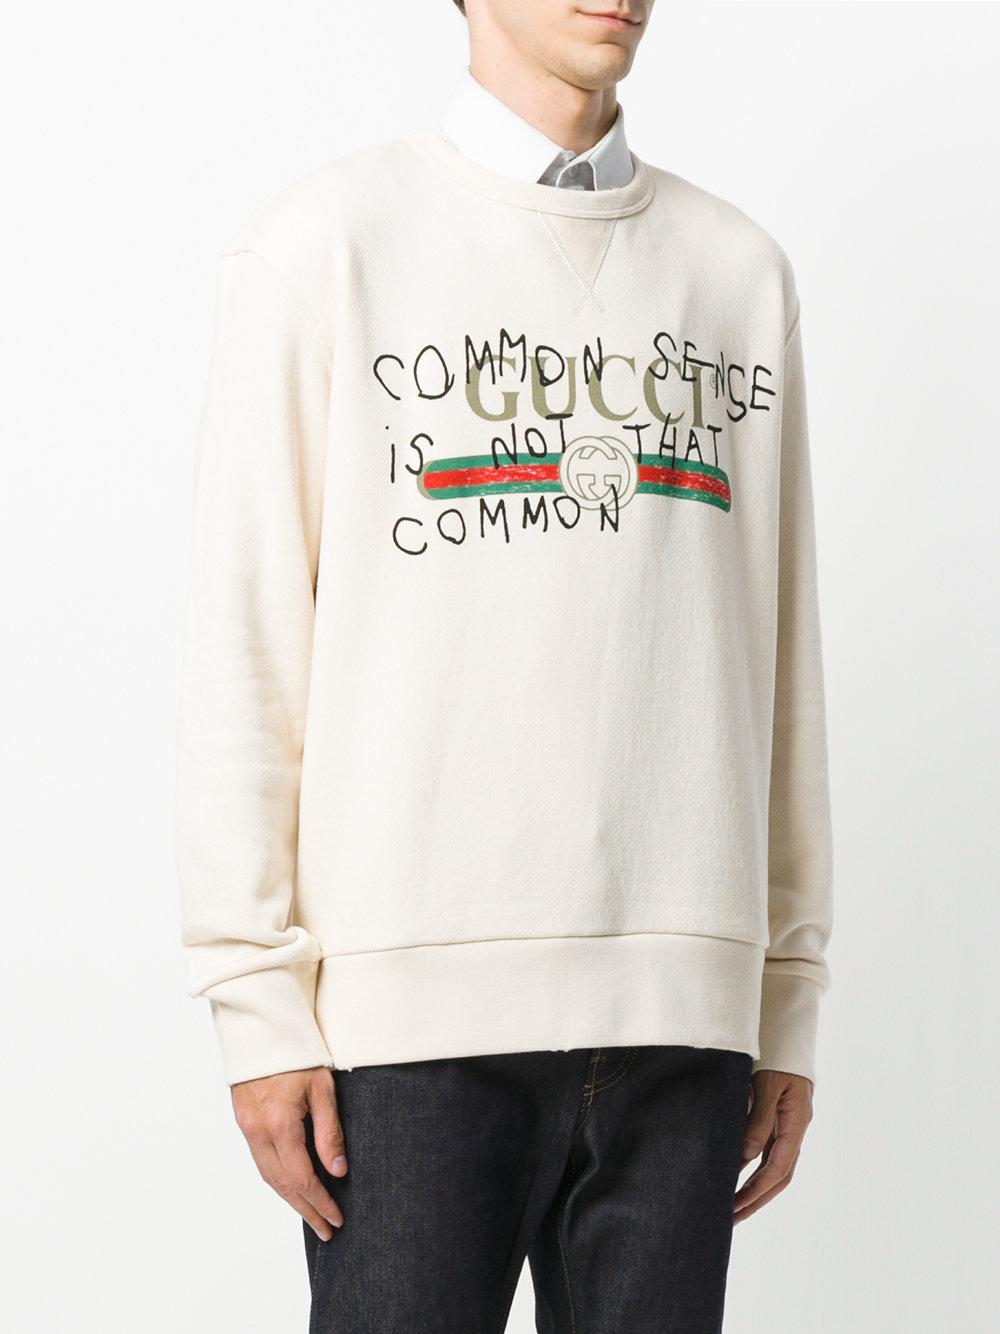 Gucci Cotton Sense Is Not Common Sweatshirt in White - Lyst